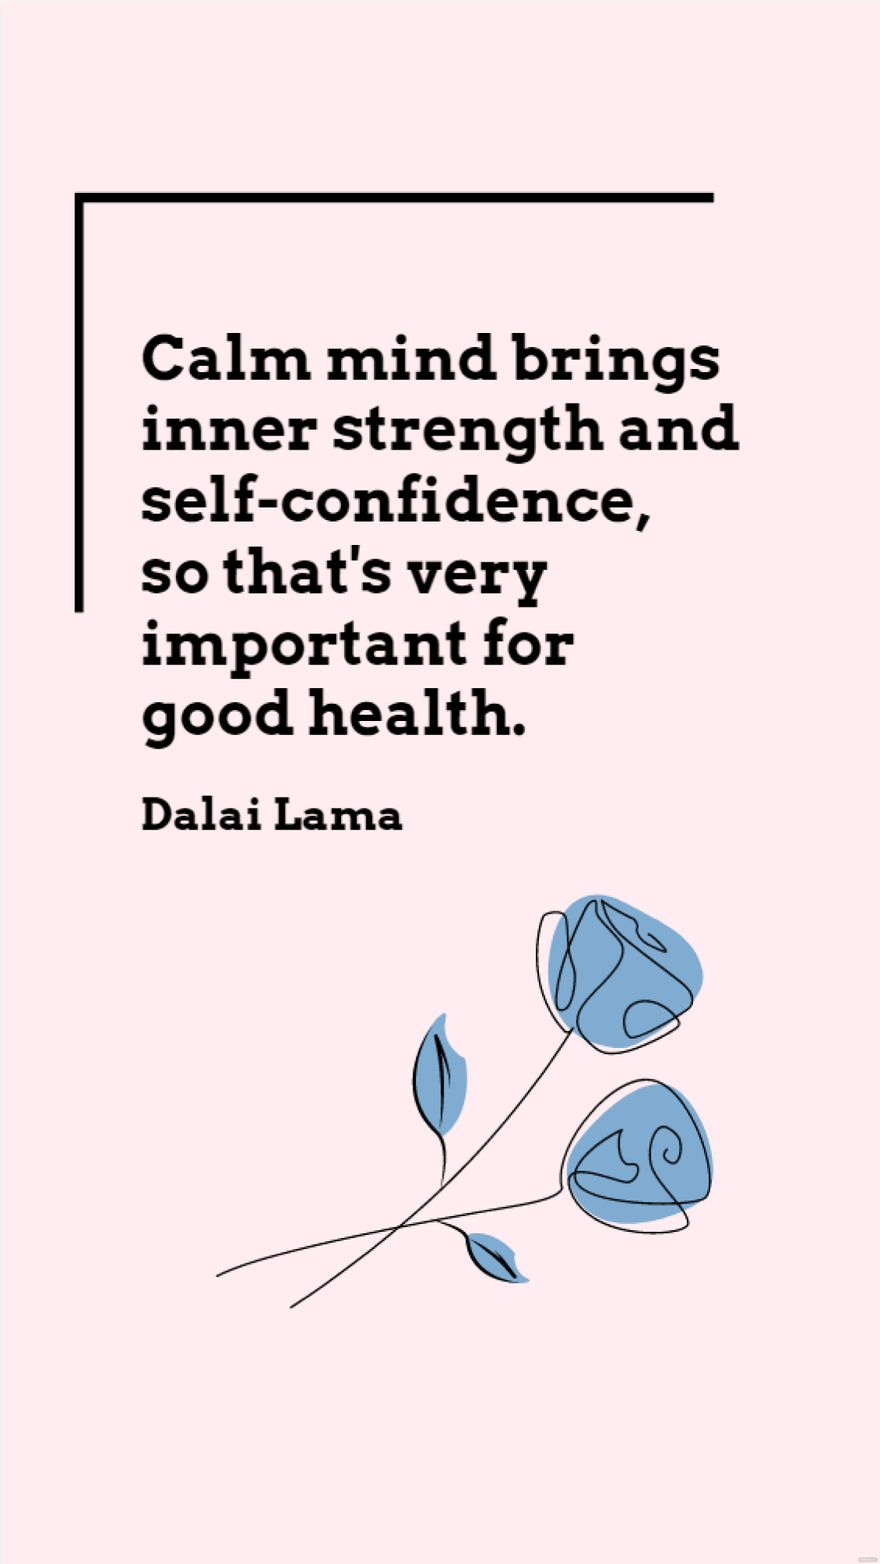 Free Dalai Lama - Calm mind brings inner strength and self-confidence, so that's very important for good health. in JPG